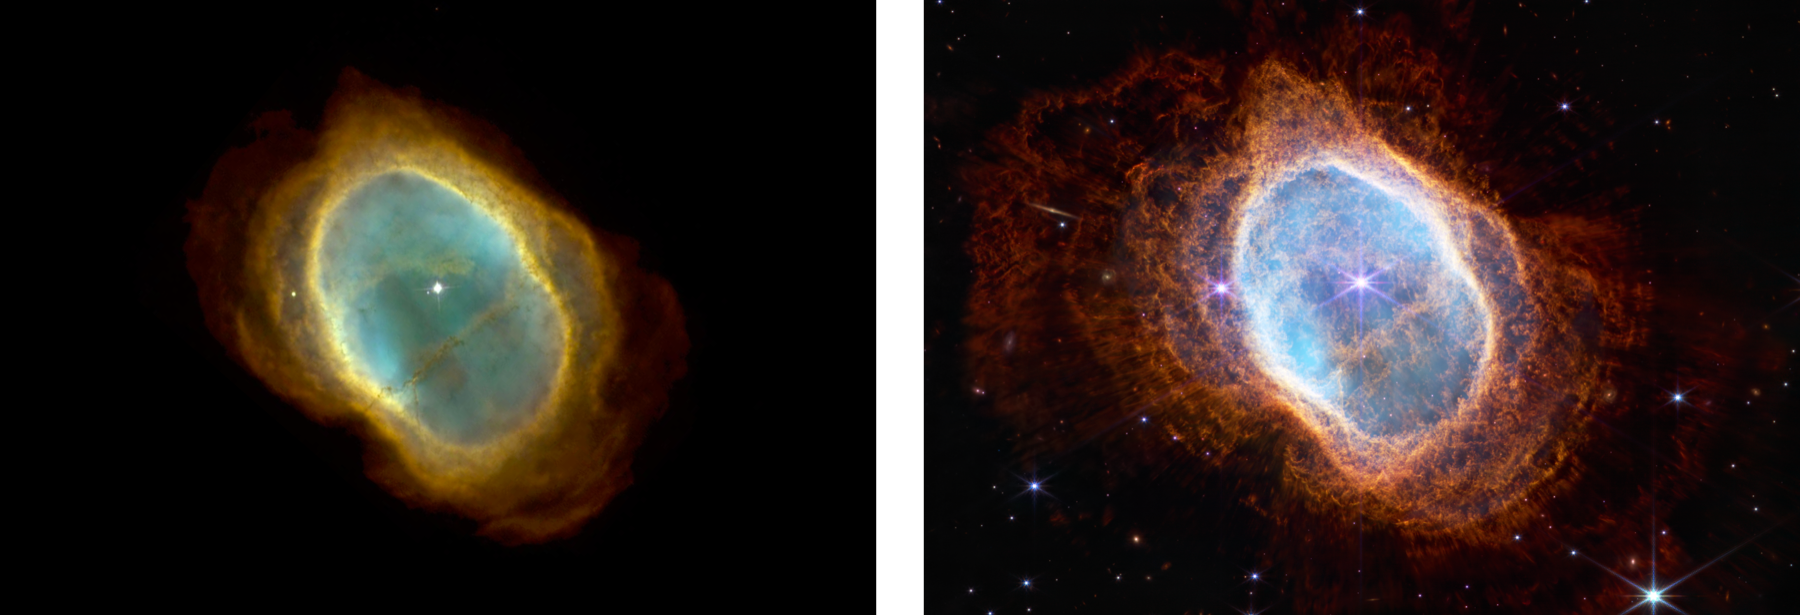 side by side images of the southern ring nebula, hubble on the left, jwst on the right. on the left, This Hubble image clearly shows two stars near the center of the nebula, a bright white one and an adjacent, fainter companion to its upper right. A third, unrelated star lies near the edge of the nebula. The flood of ultraviolet radiation from the faint star’s surface makes the surrounding gases, radiating out from the stars in an oval, glow through fluorescence. The colors were chosen to represent the temperature of the gases. Blue represents the hottest gas, which is confined to the inner region of the nebula. Red represents the coolest gas, at the outer edge. Also revealed is a host of filaments, including one long one that resembles a waistband, made out of dust particles which have condensed out of the expanding gases. And on the right, The image is split down the middle, showing two views of the Southern Ring Nebula. Both feature black backgrounds speckled with tiny bright stars and distant galaxies. Both show the planetary nebula as a misshapen oval that is slightly angled from top left to bottom right and takes up the majority of each image. At left, the near-infrared image shows a bright white star at the center with long diffraction spikes. Large, transparent teal and orange ovals, which are shells ejected by the unseen central star, surround it. At right, the mid-infrared image shows two stars at the center very close to one another. The one at left is red, the smaller one at right is light blue. The blue star has tiny triangles around it. A large transparent red oval surrounds the central stars. From that extend shells in a mix of colors, which are red to the left and right and teal to the top and bottom. Overall, the oval shape of the planetary nebula appears slightly smaller than the one seen at left.